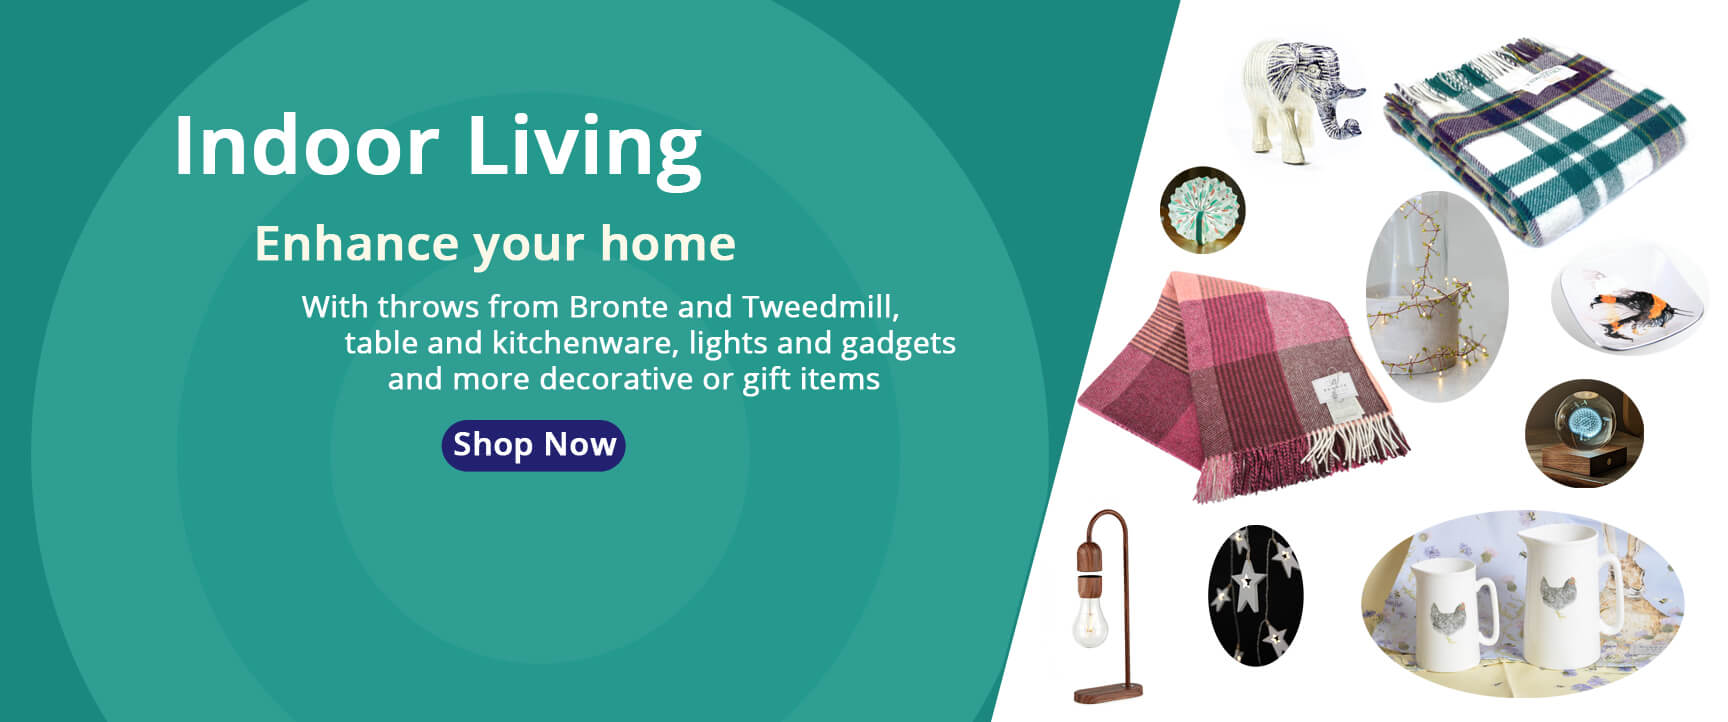 Throws from Bronte and Tweedmill tableware kitchenware lights and gadgets to enhance your home